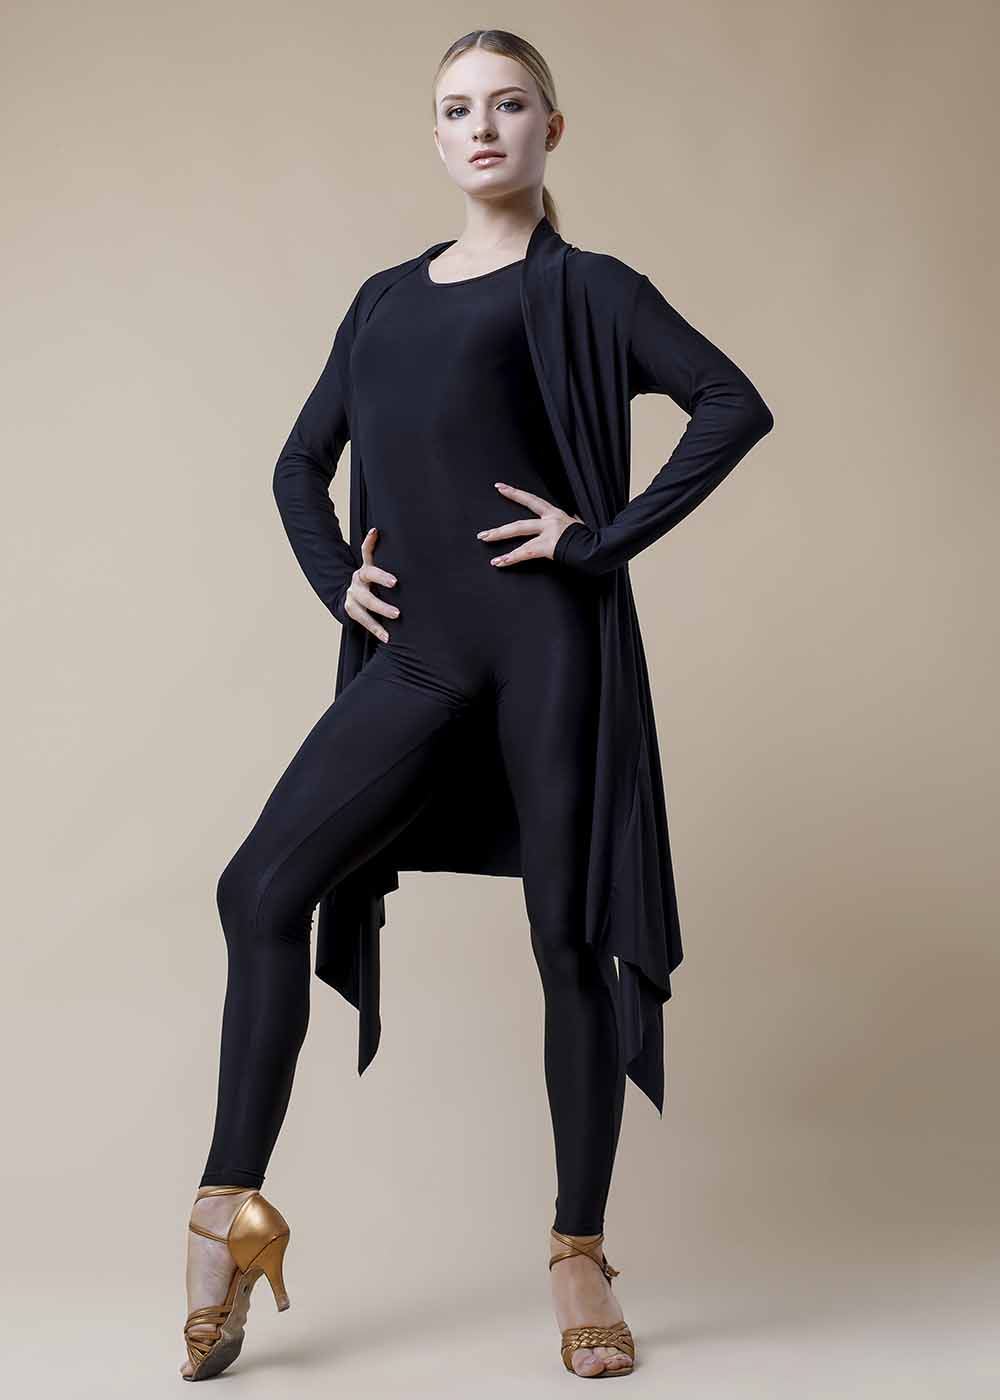 CONTEMPORARY long sleeve cardigan by Grand Prix